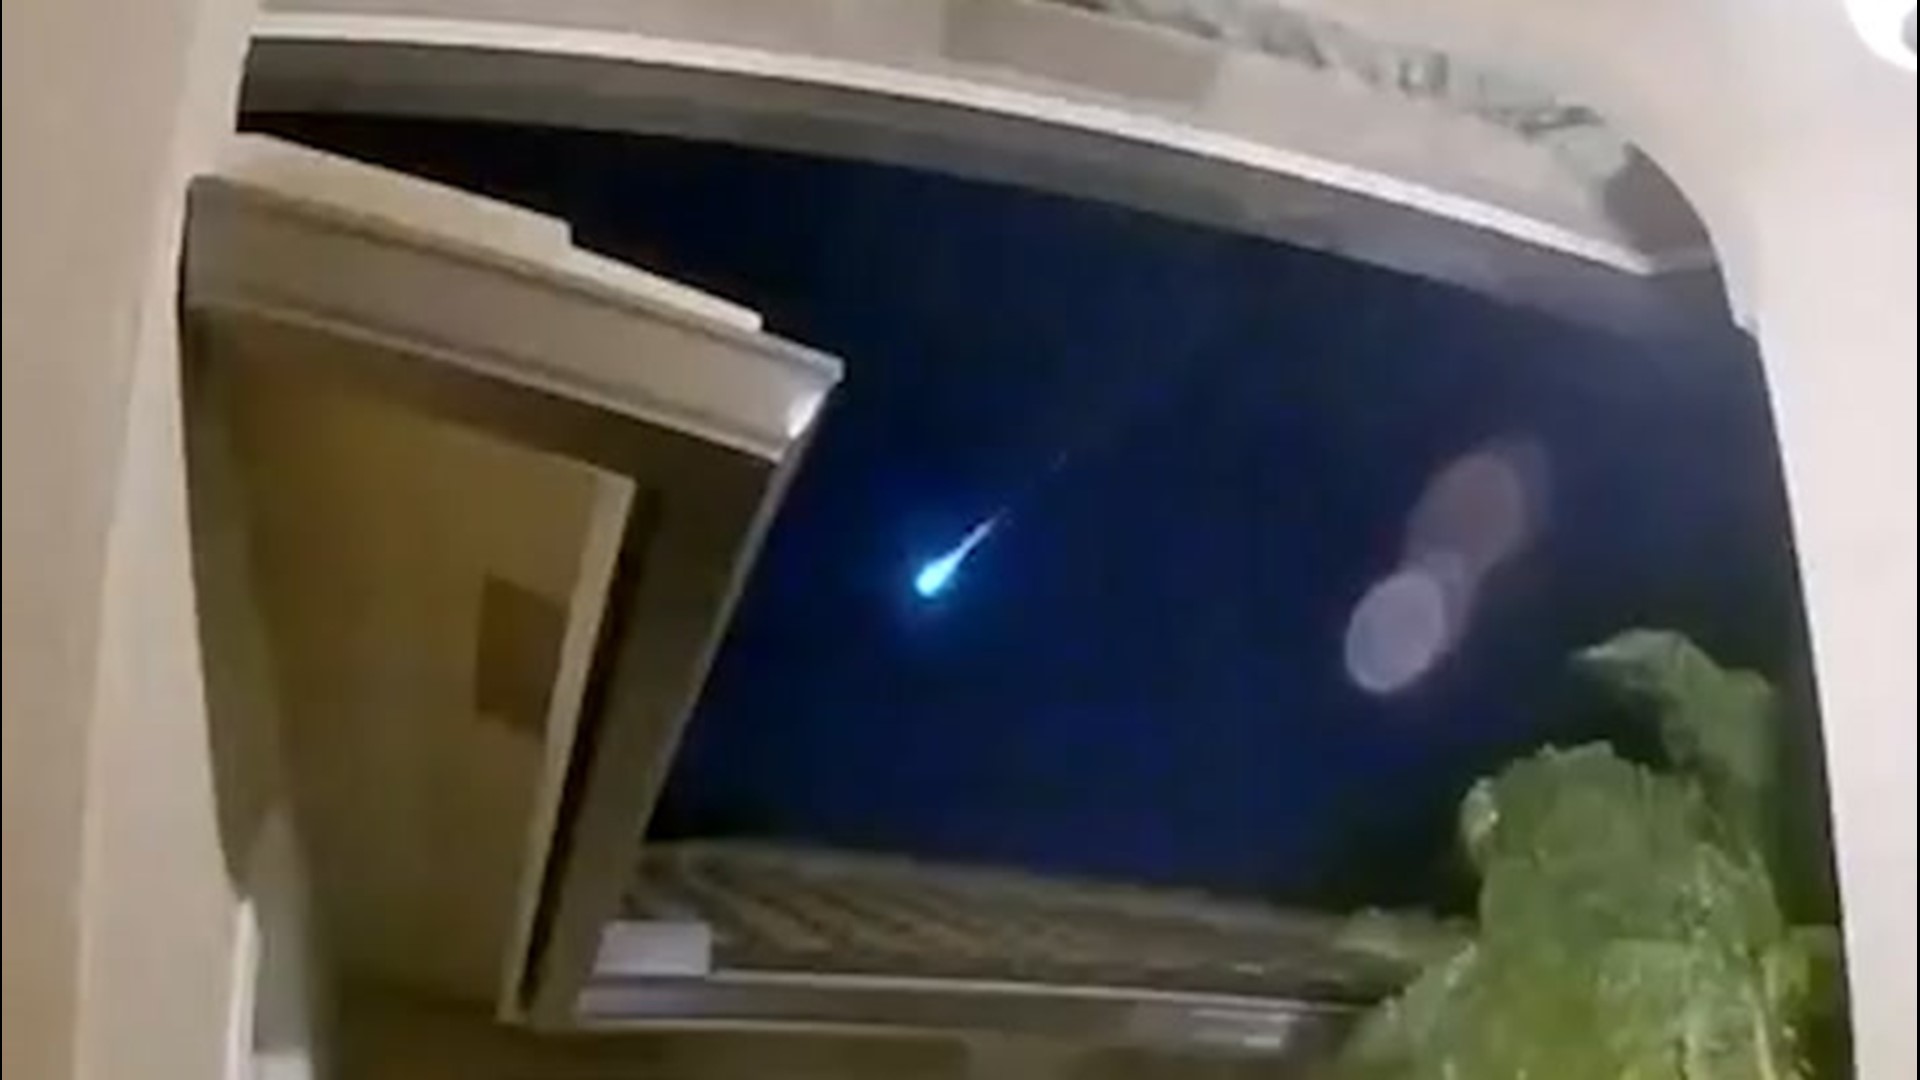 A meteor was spotted, lighting up the sky in different parts of Florida on the night of April 12.